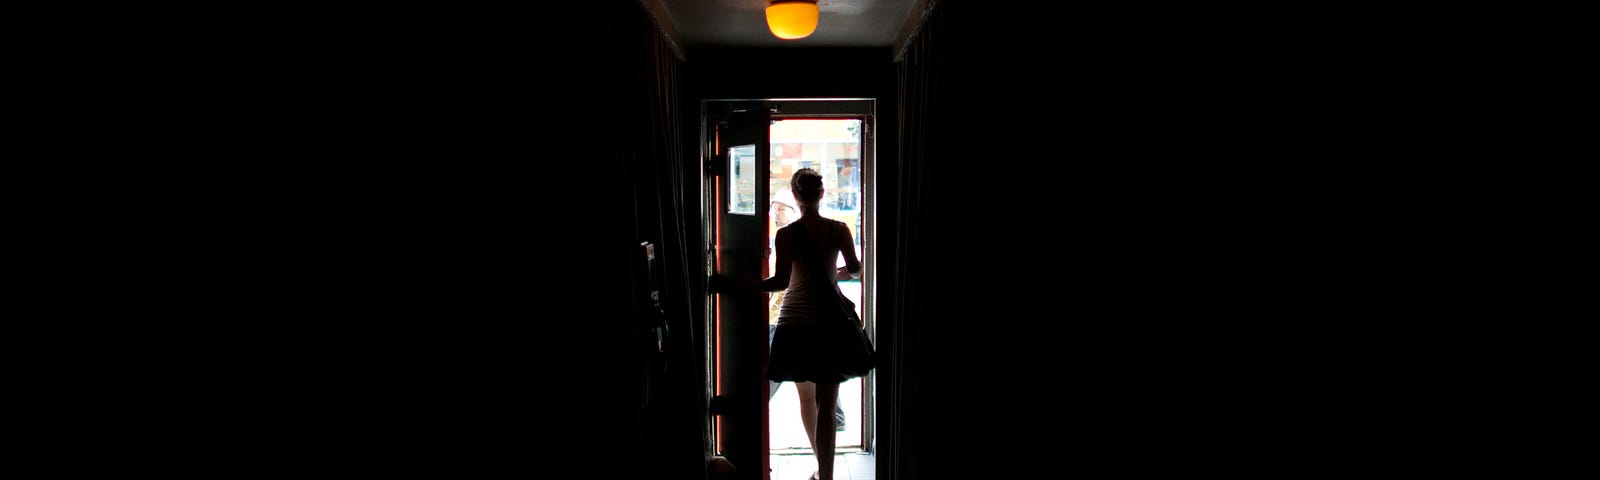 A mostly dark photo of a woman who is opening a door that casts light in the middle of the picture.